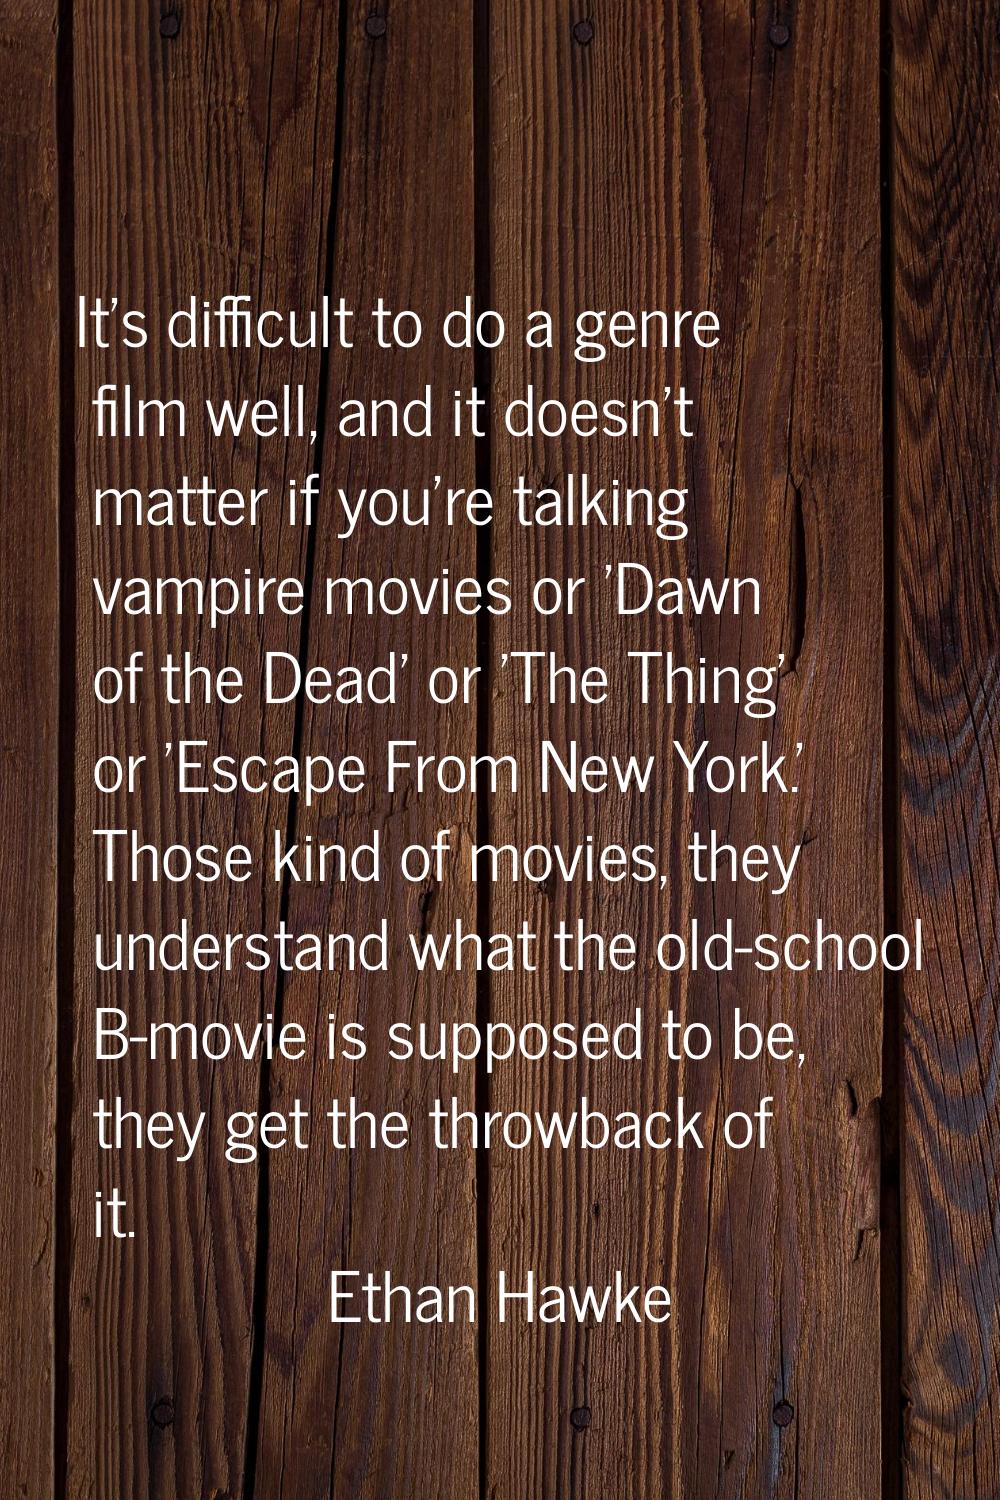 It's difficult to do a genre film well, and it doesn't matter if you're talking vampire movies or '